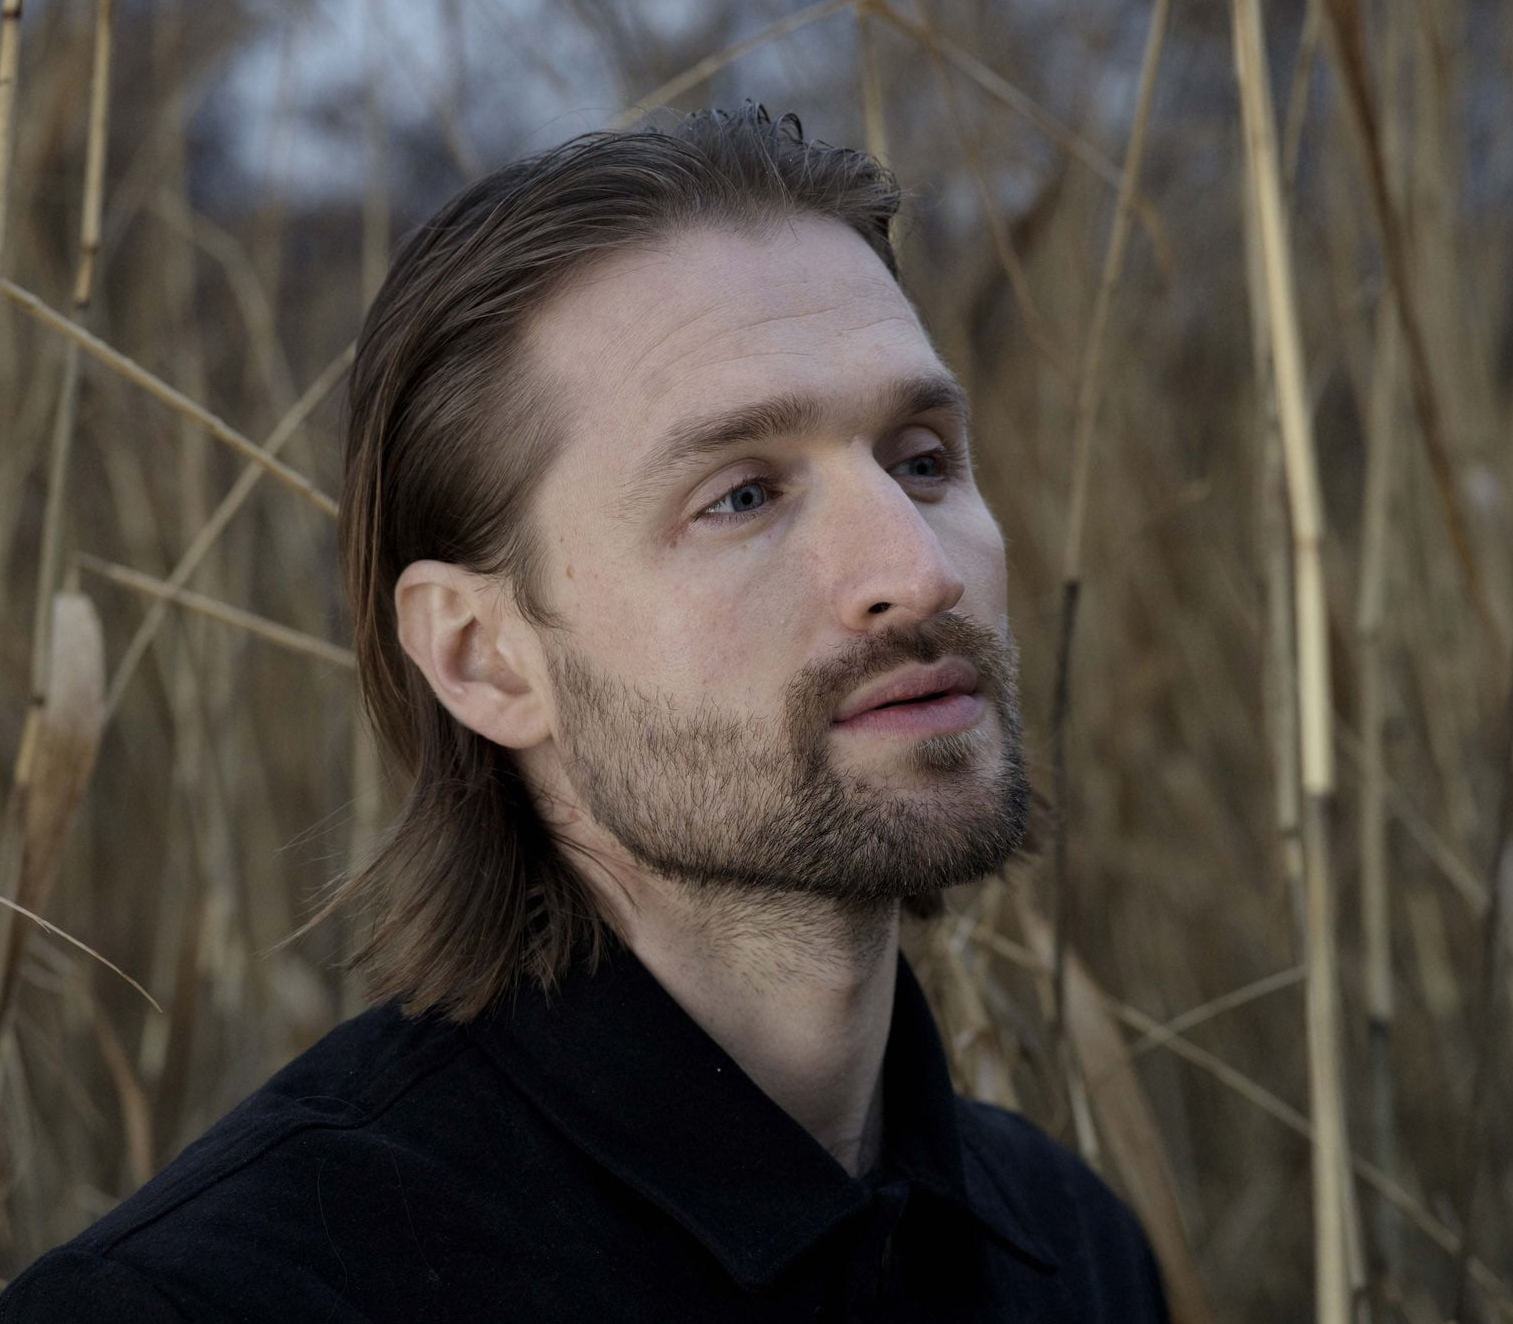 IN CONVERSATION: Hayden Thorpe on his Aerial Songs EP "we need to become part of nature again" 1